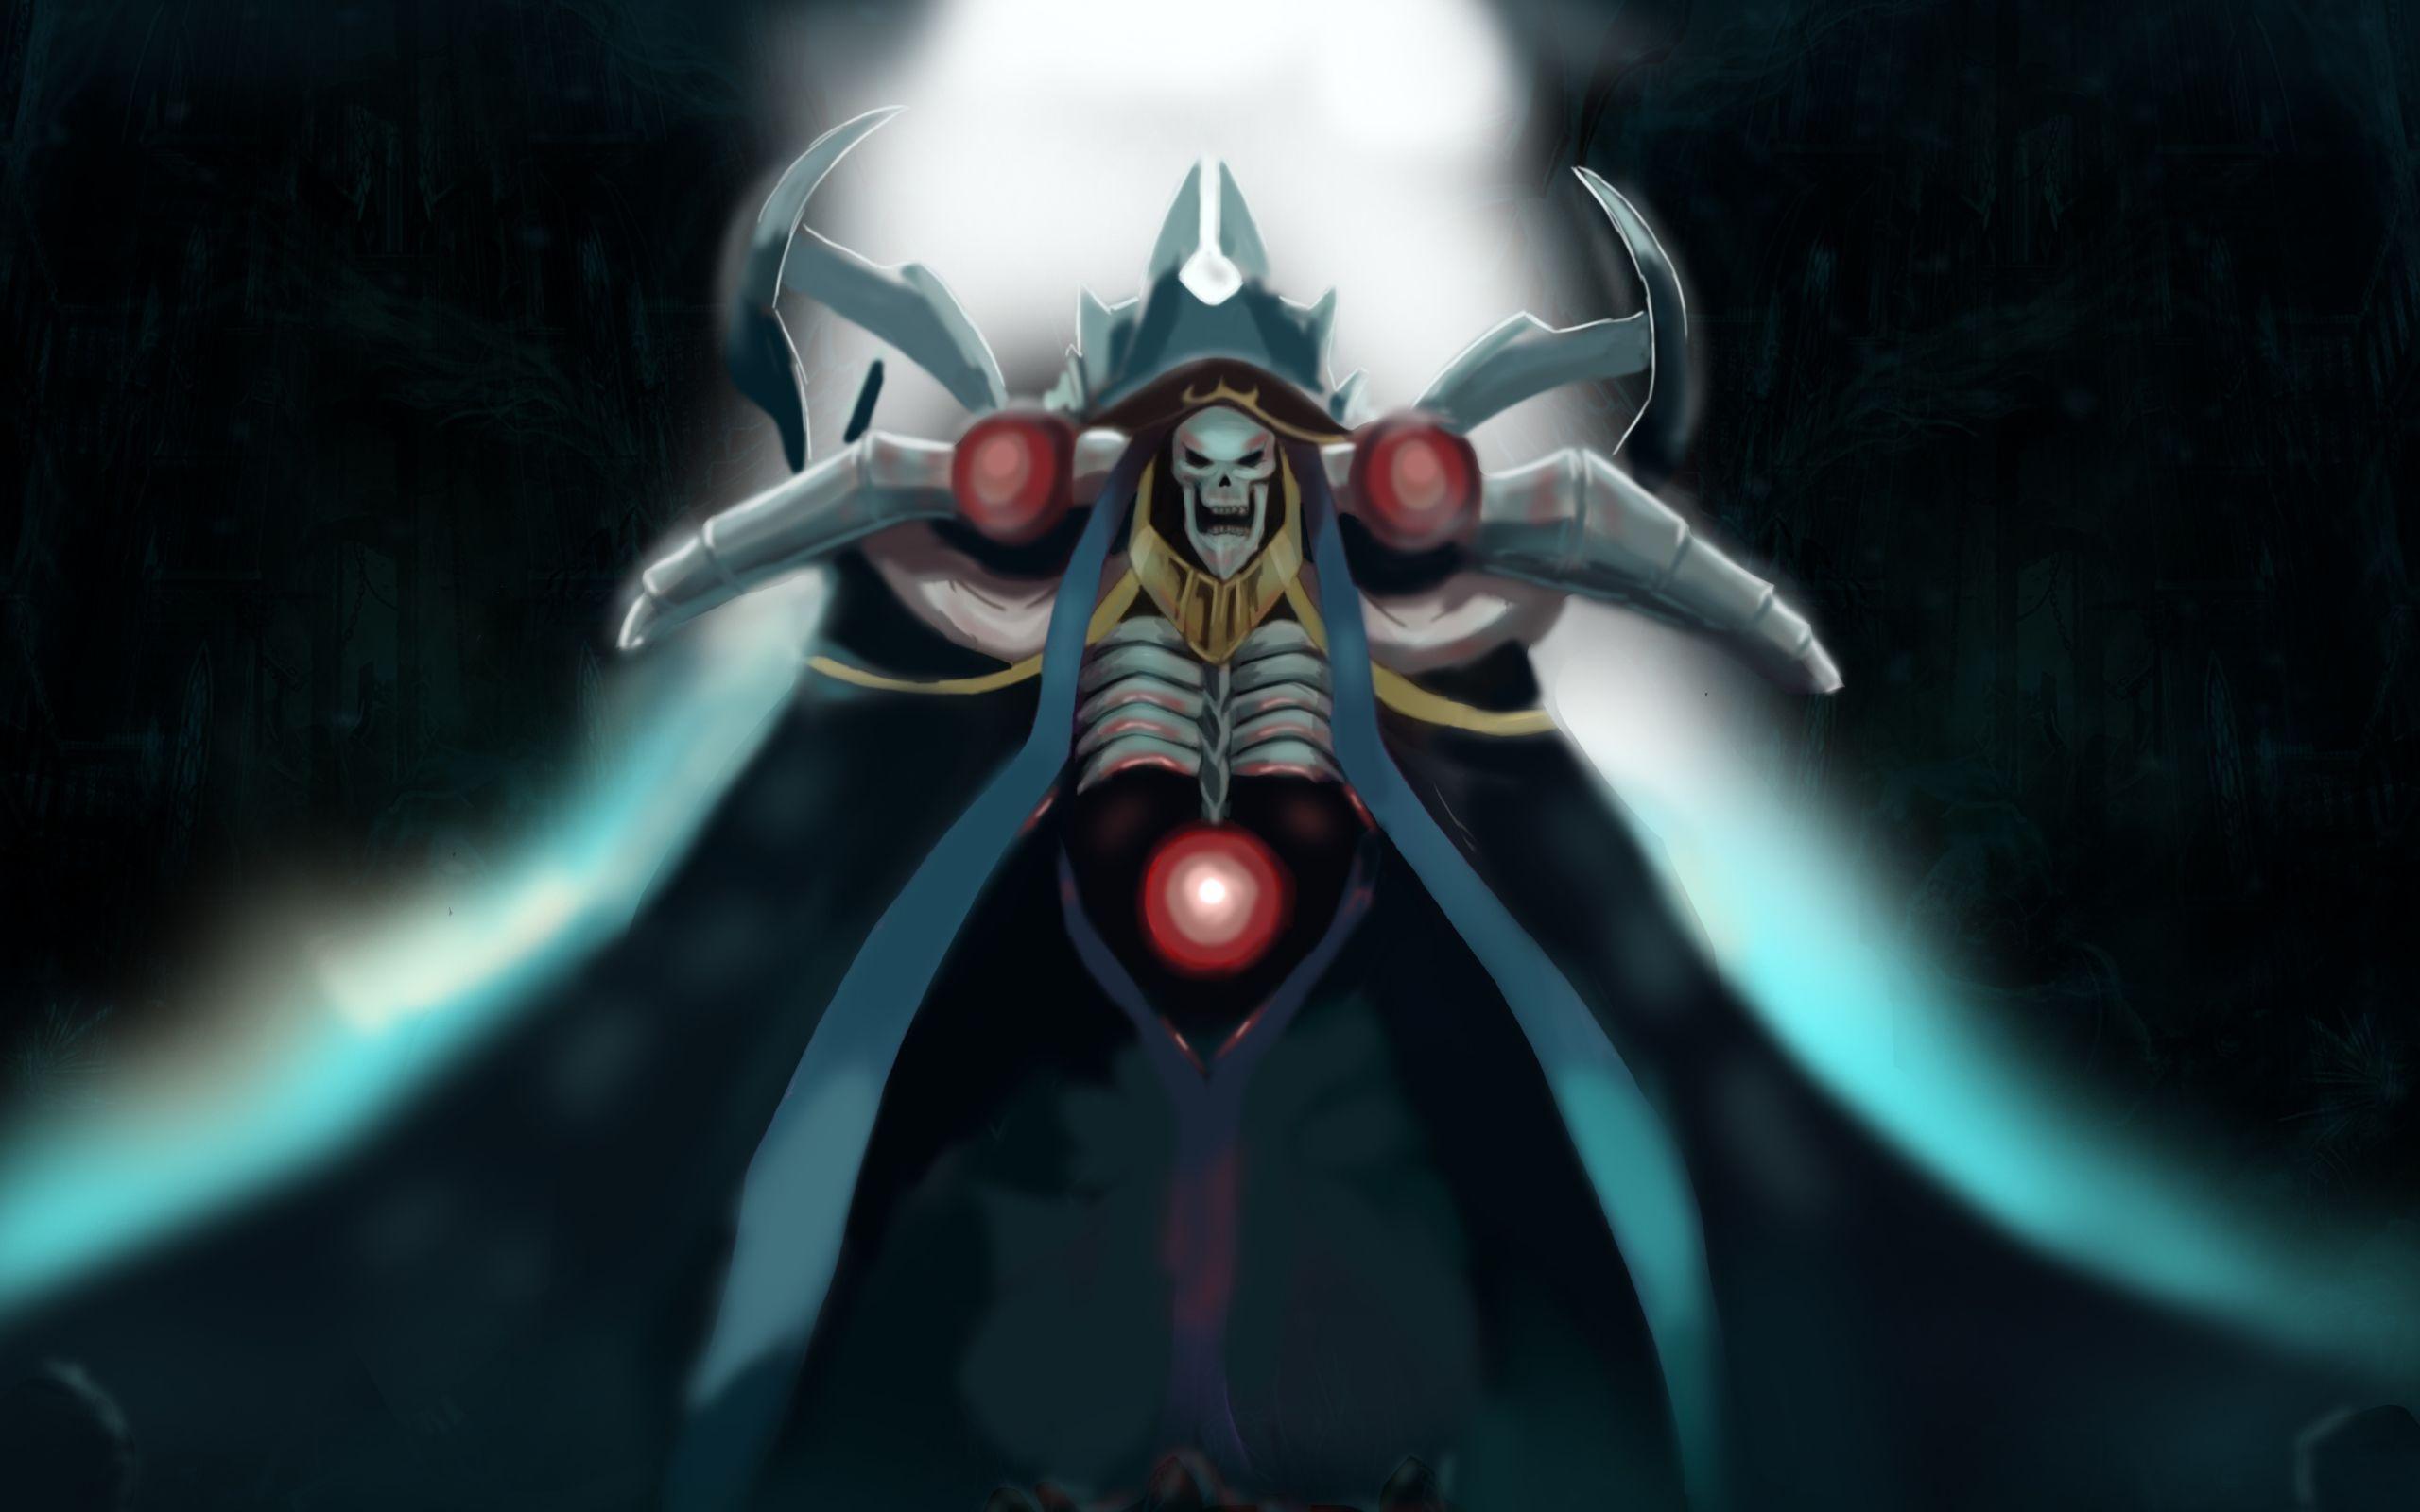 Ainz Ooal Gown - Overlord - HD Wallpaper by Exys Inc. #3079138 - Zerochan  Anime Image Board